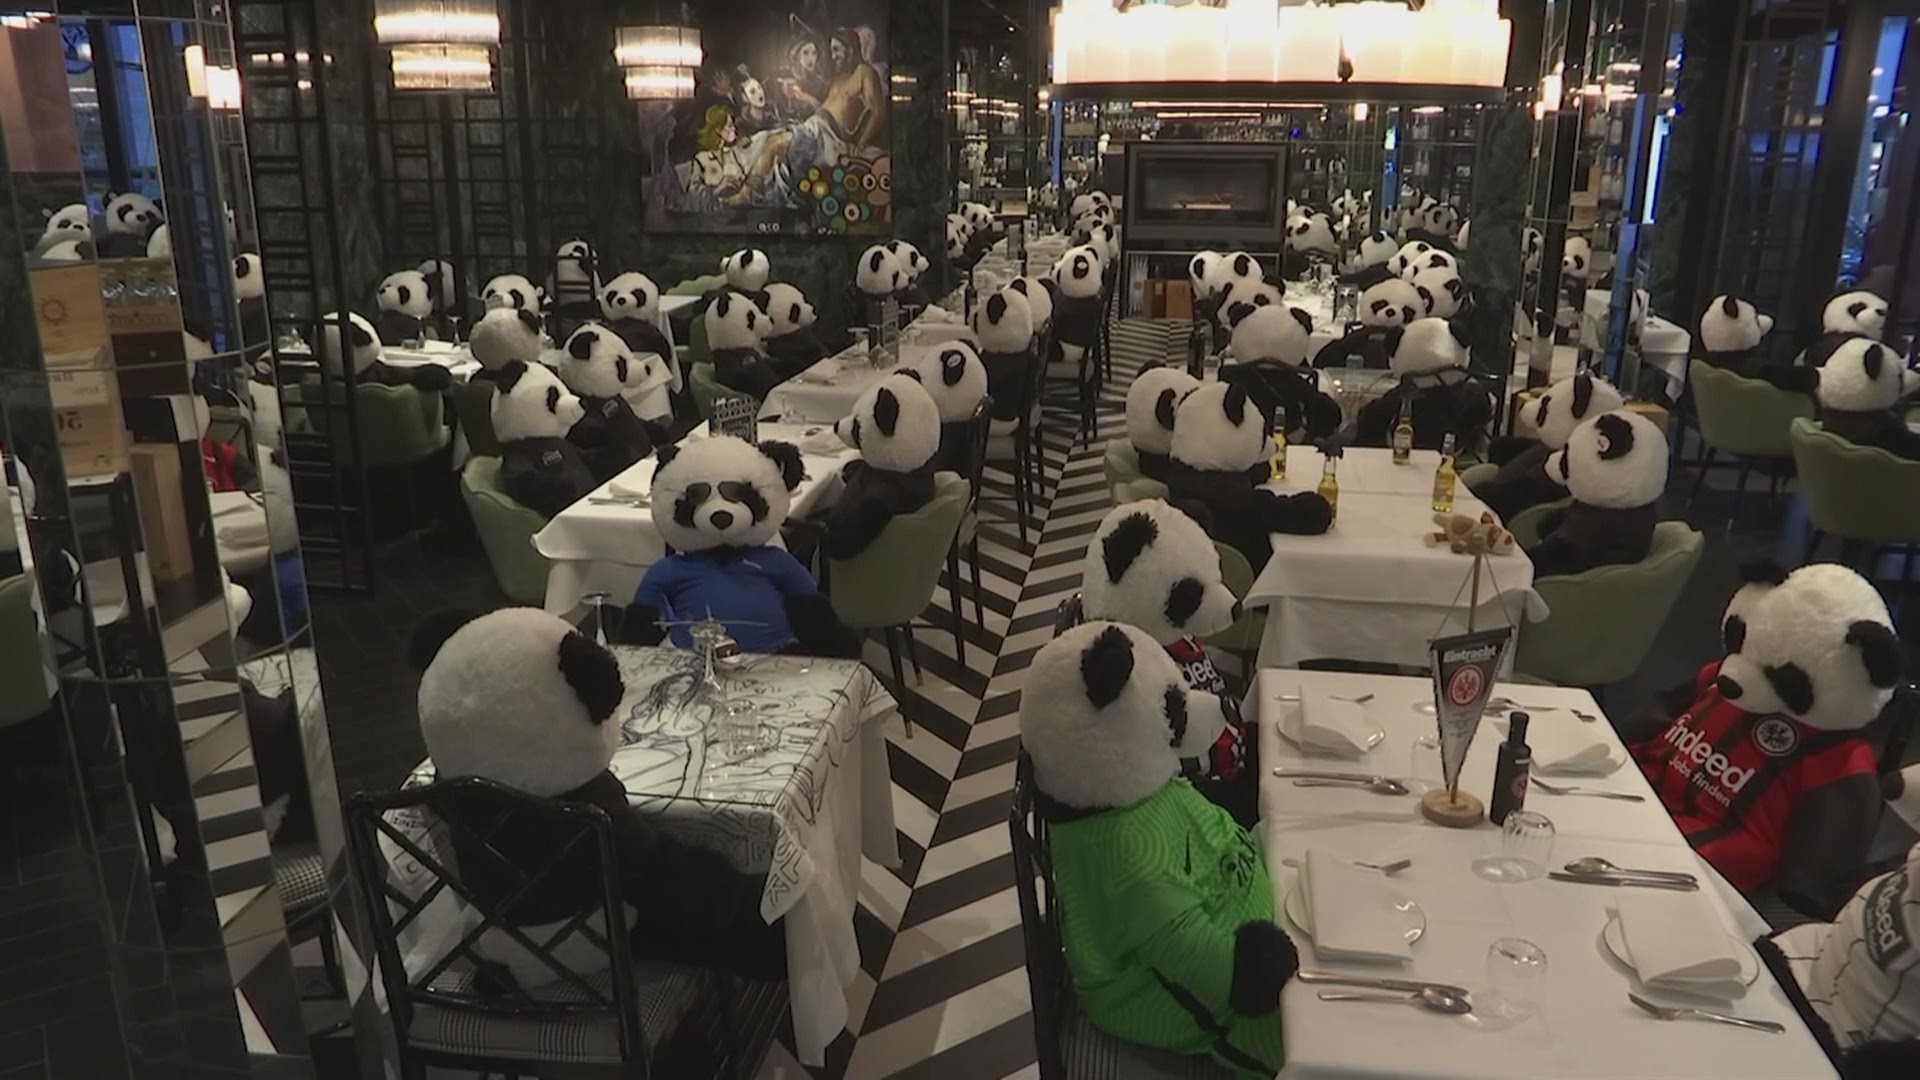 A restaurant owner in Germany has been using stuffed toy panda bears as a form of silent protest against the coronavirus lockdown.